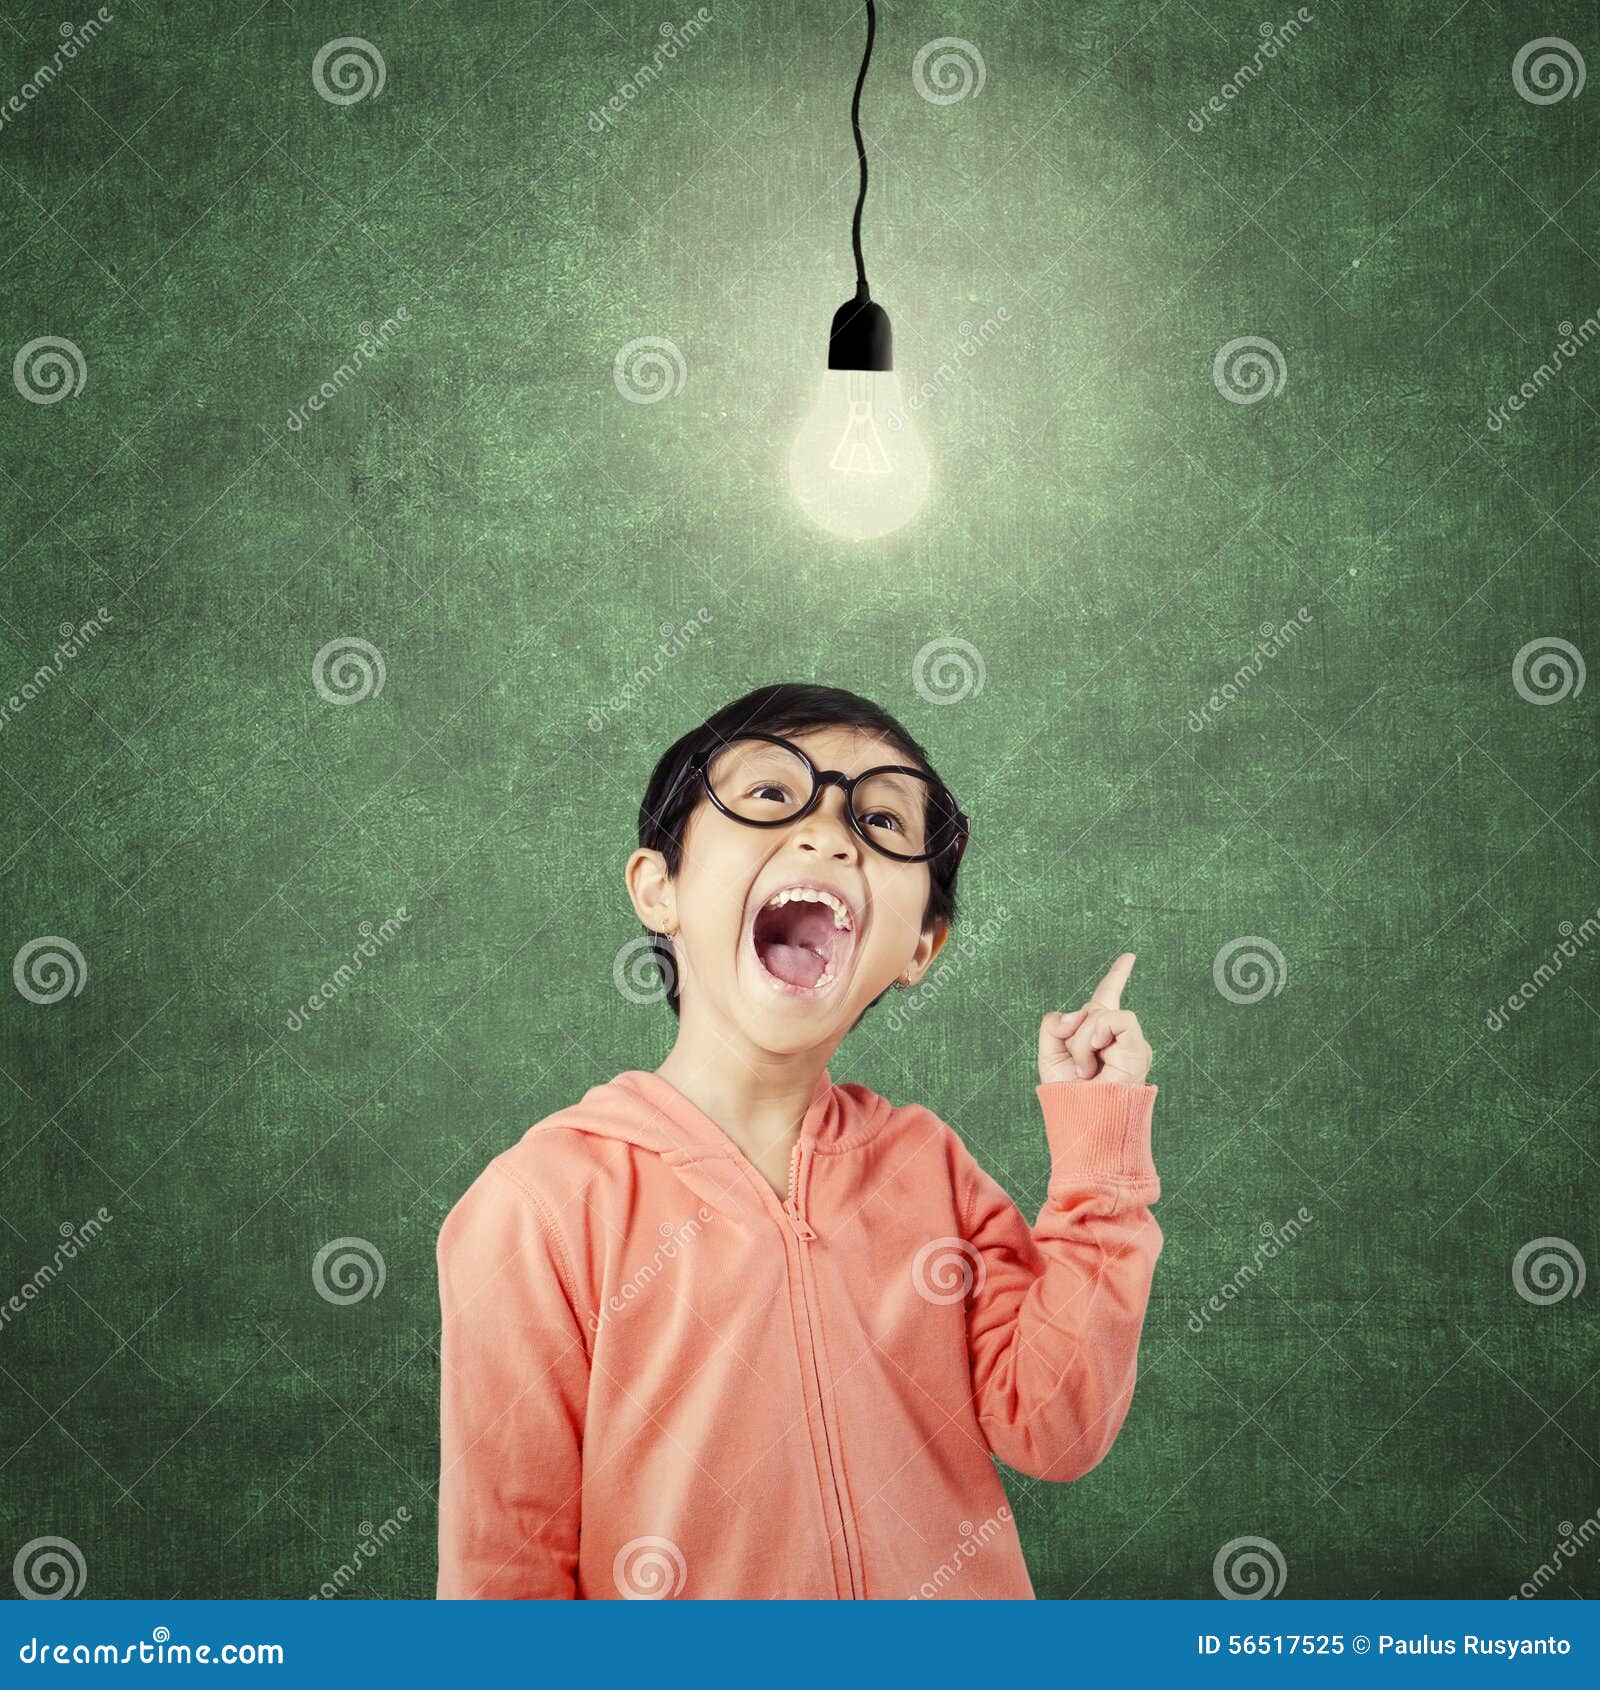 Clever Kindergarten Student Pointing At Bright Lamp Stock Image - Image of genius ...